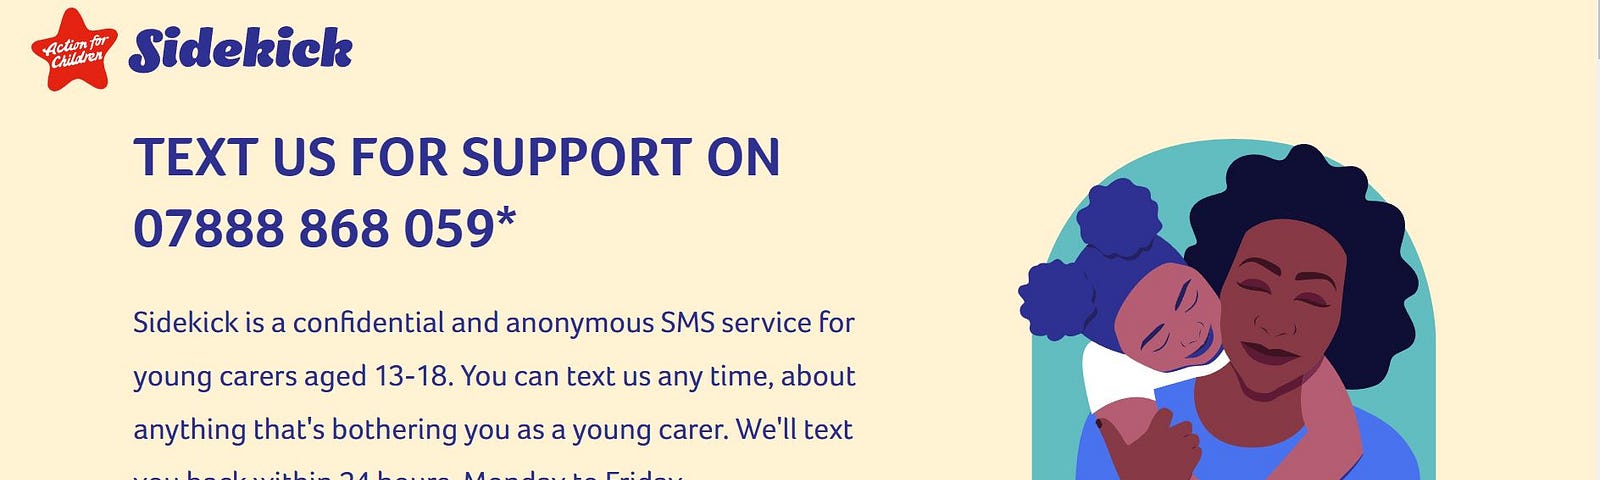 Homepage of the Sidekick website. The headline says “Text us for support” and is followed by a short description of the service. There is an illustration of a black woman wearing a blue t-shirt being affectively hugged by a young black girl.